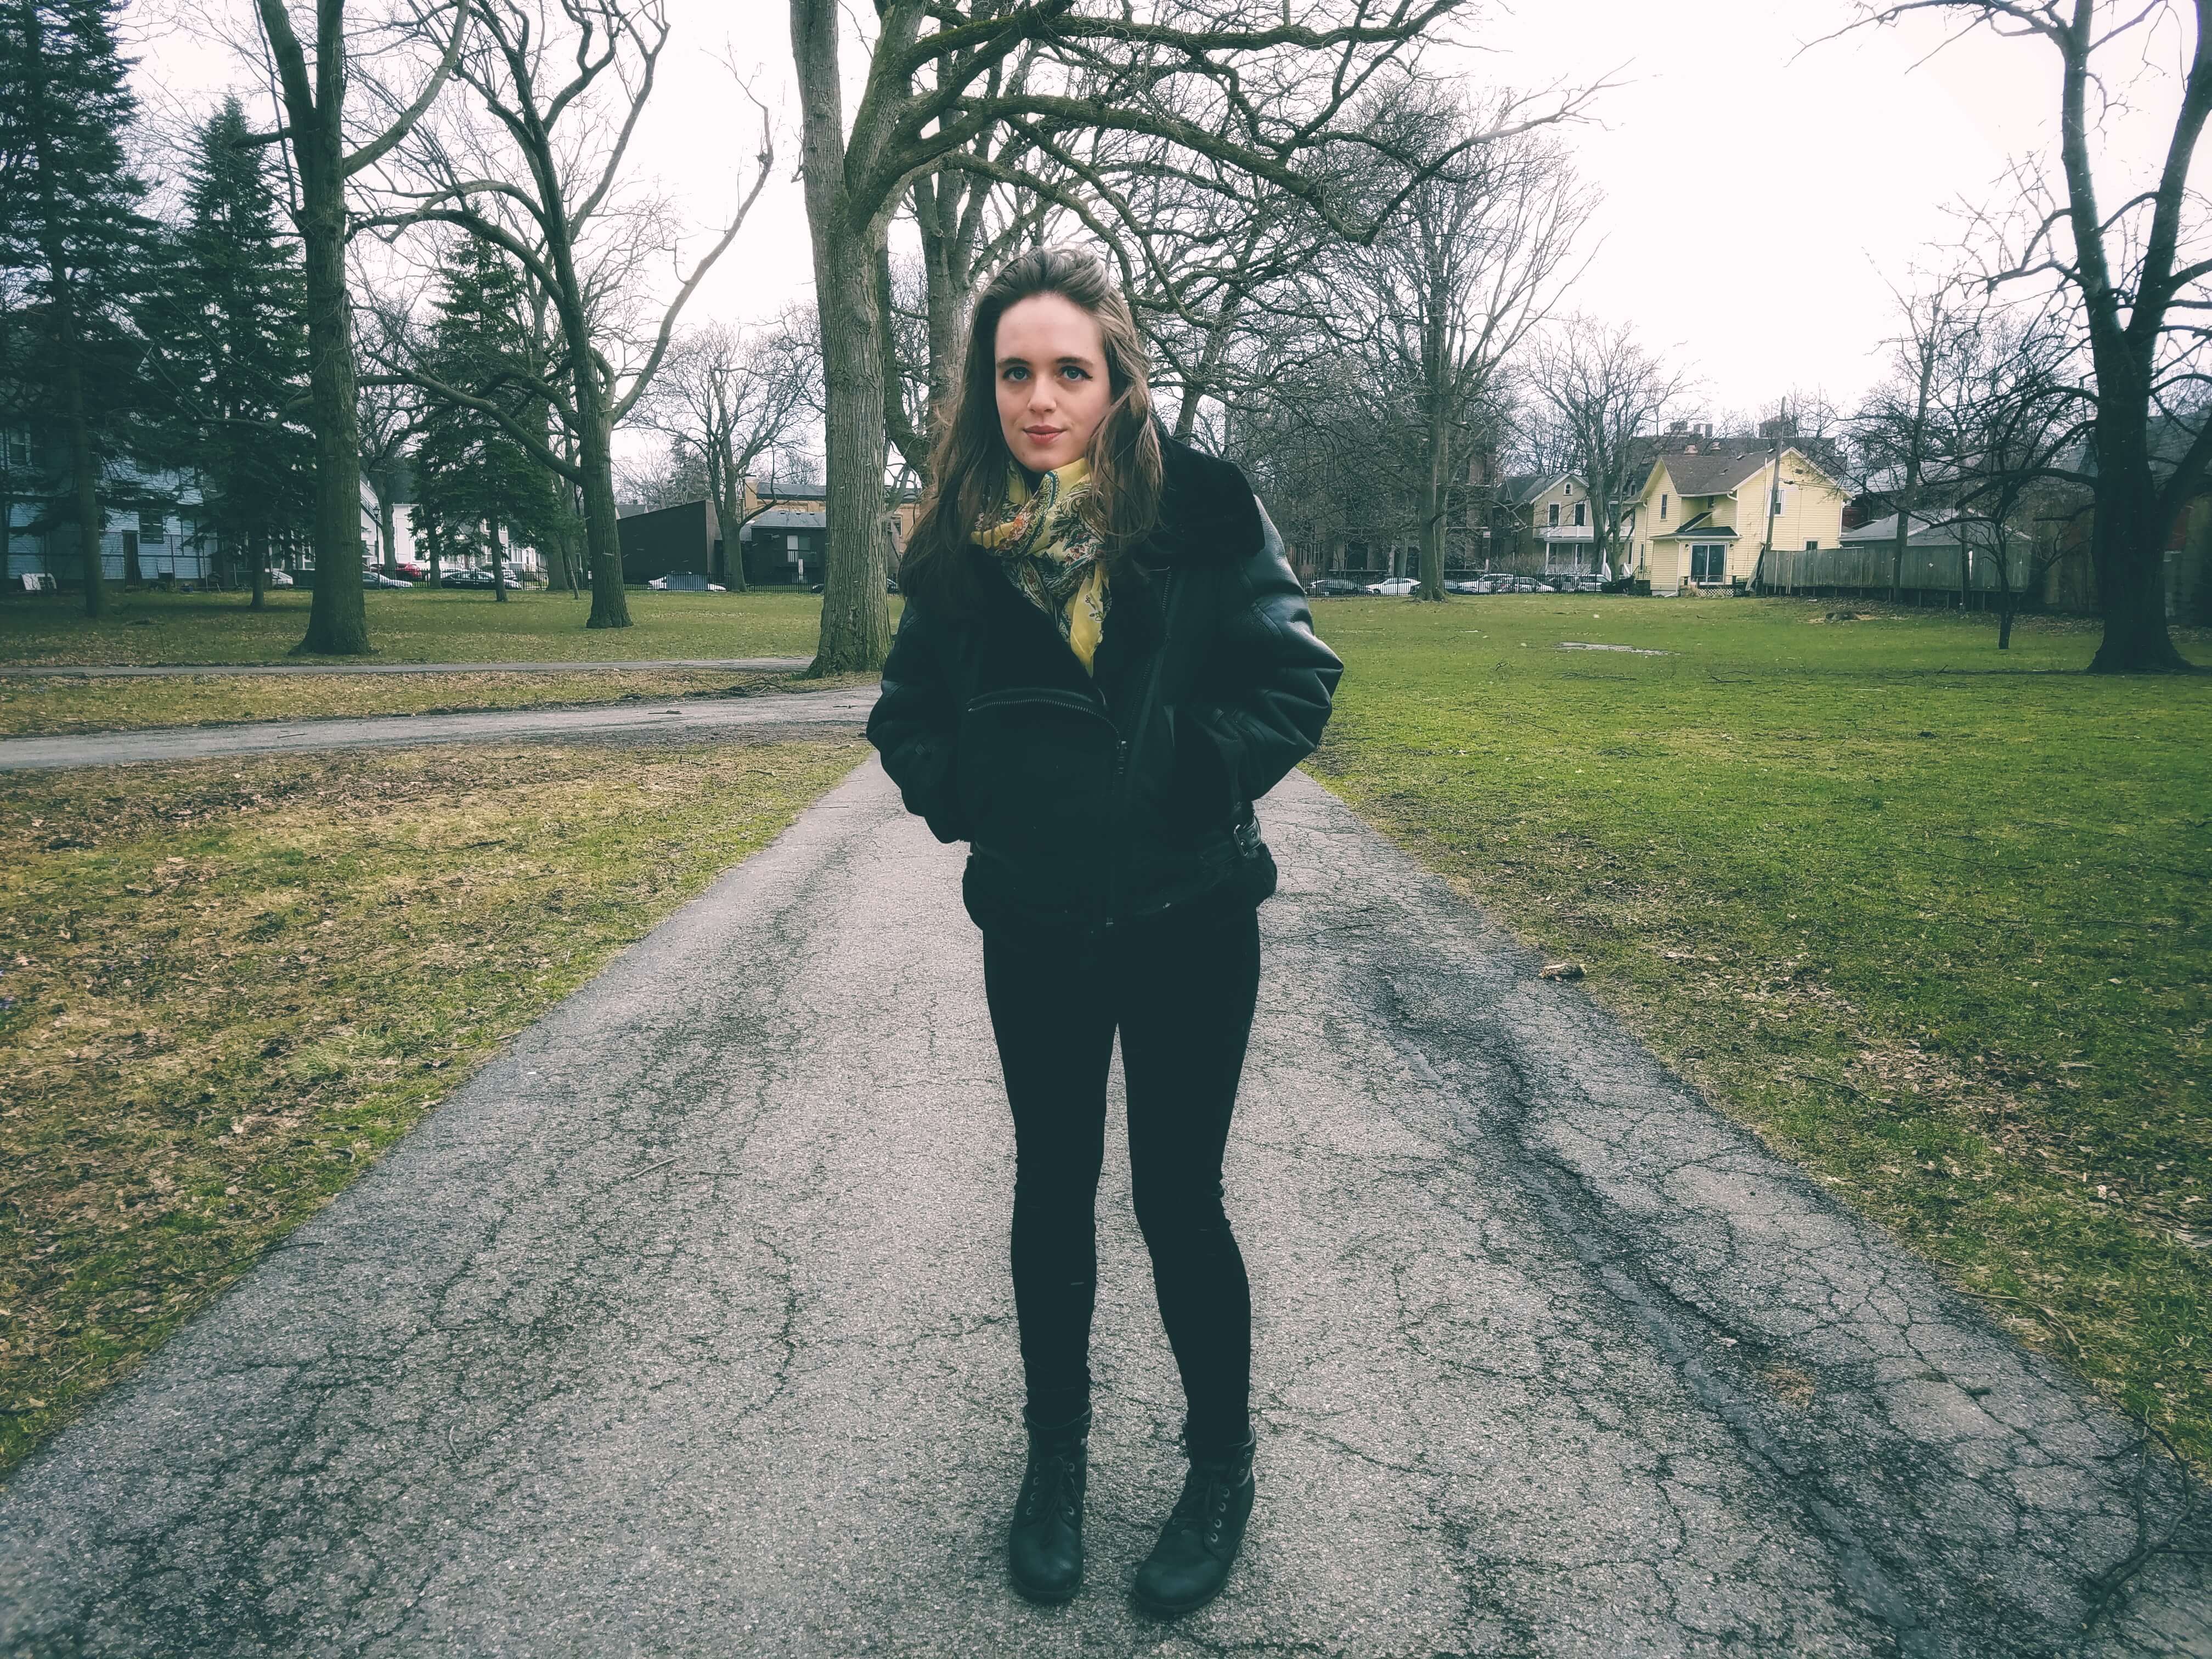 From hiking trails to ethno-chaos concerts, Reagan McNameeKing thinks Rochester has it all